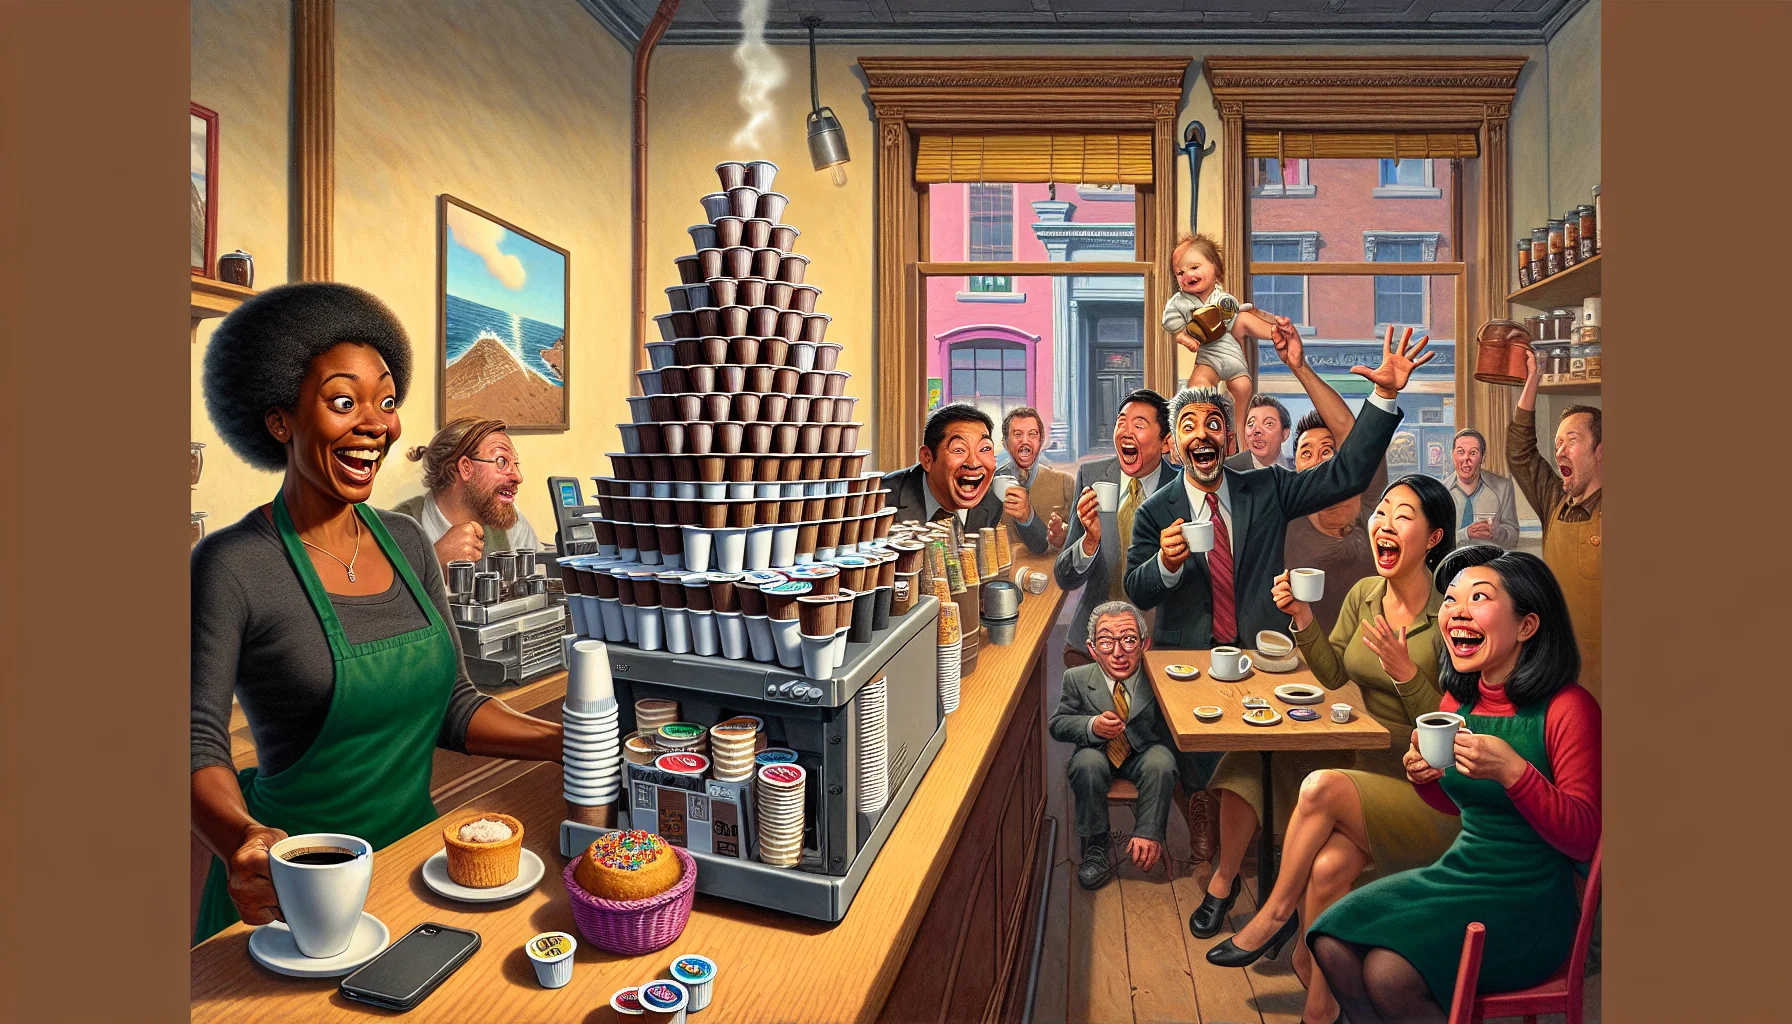 Picture a humorous, bustling scene at a tiny coffee shop. Full of life, color, and a dash of absurdity. On the counter, a pyramid of espresso K-cups teeters precariously, as a Black female barista with a witty t-shirt chuckles and prepares to add one more cup. Not too far off, an Asian man, wide-eyed with anticipation, holds a coffee mug eagerly. A Hispanic woman, clad in a business suit, is stifling a laugh as she watches this from her corner table with a pastry in hand. This delightful spectacle is surely compelling anyone to join in the coffee enjoyment.